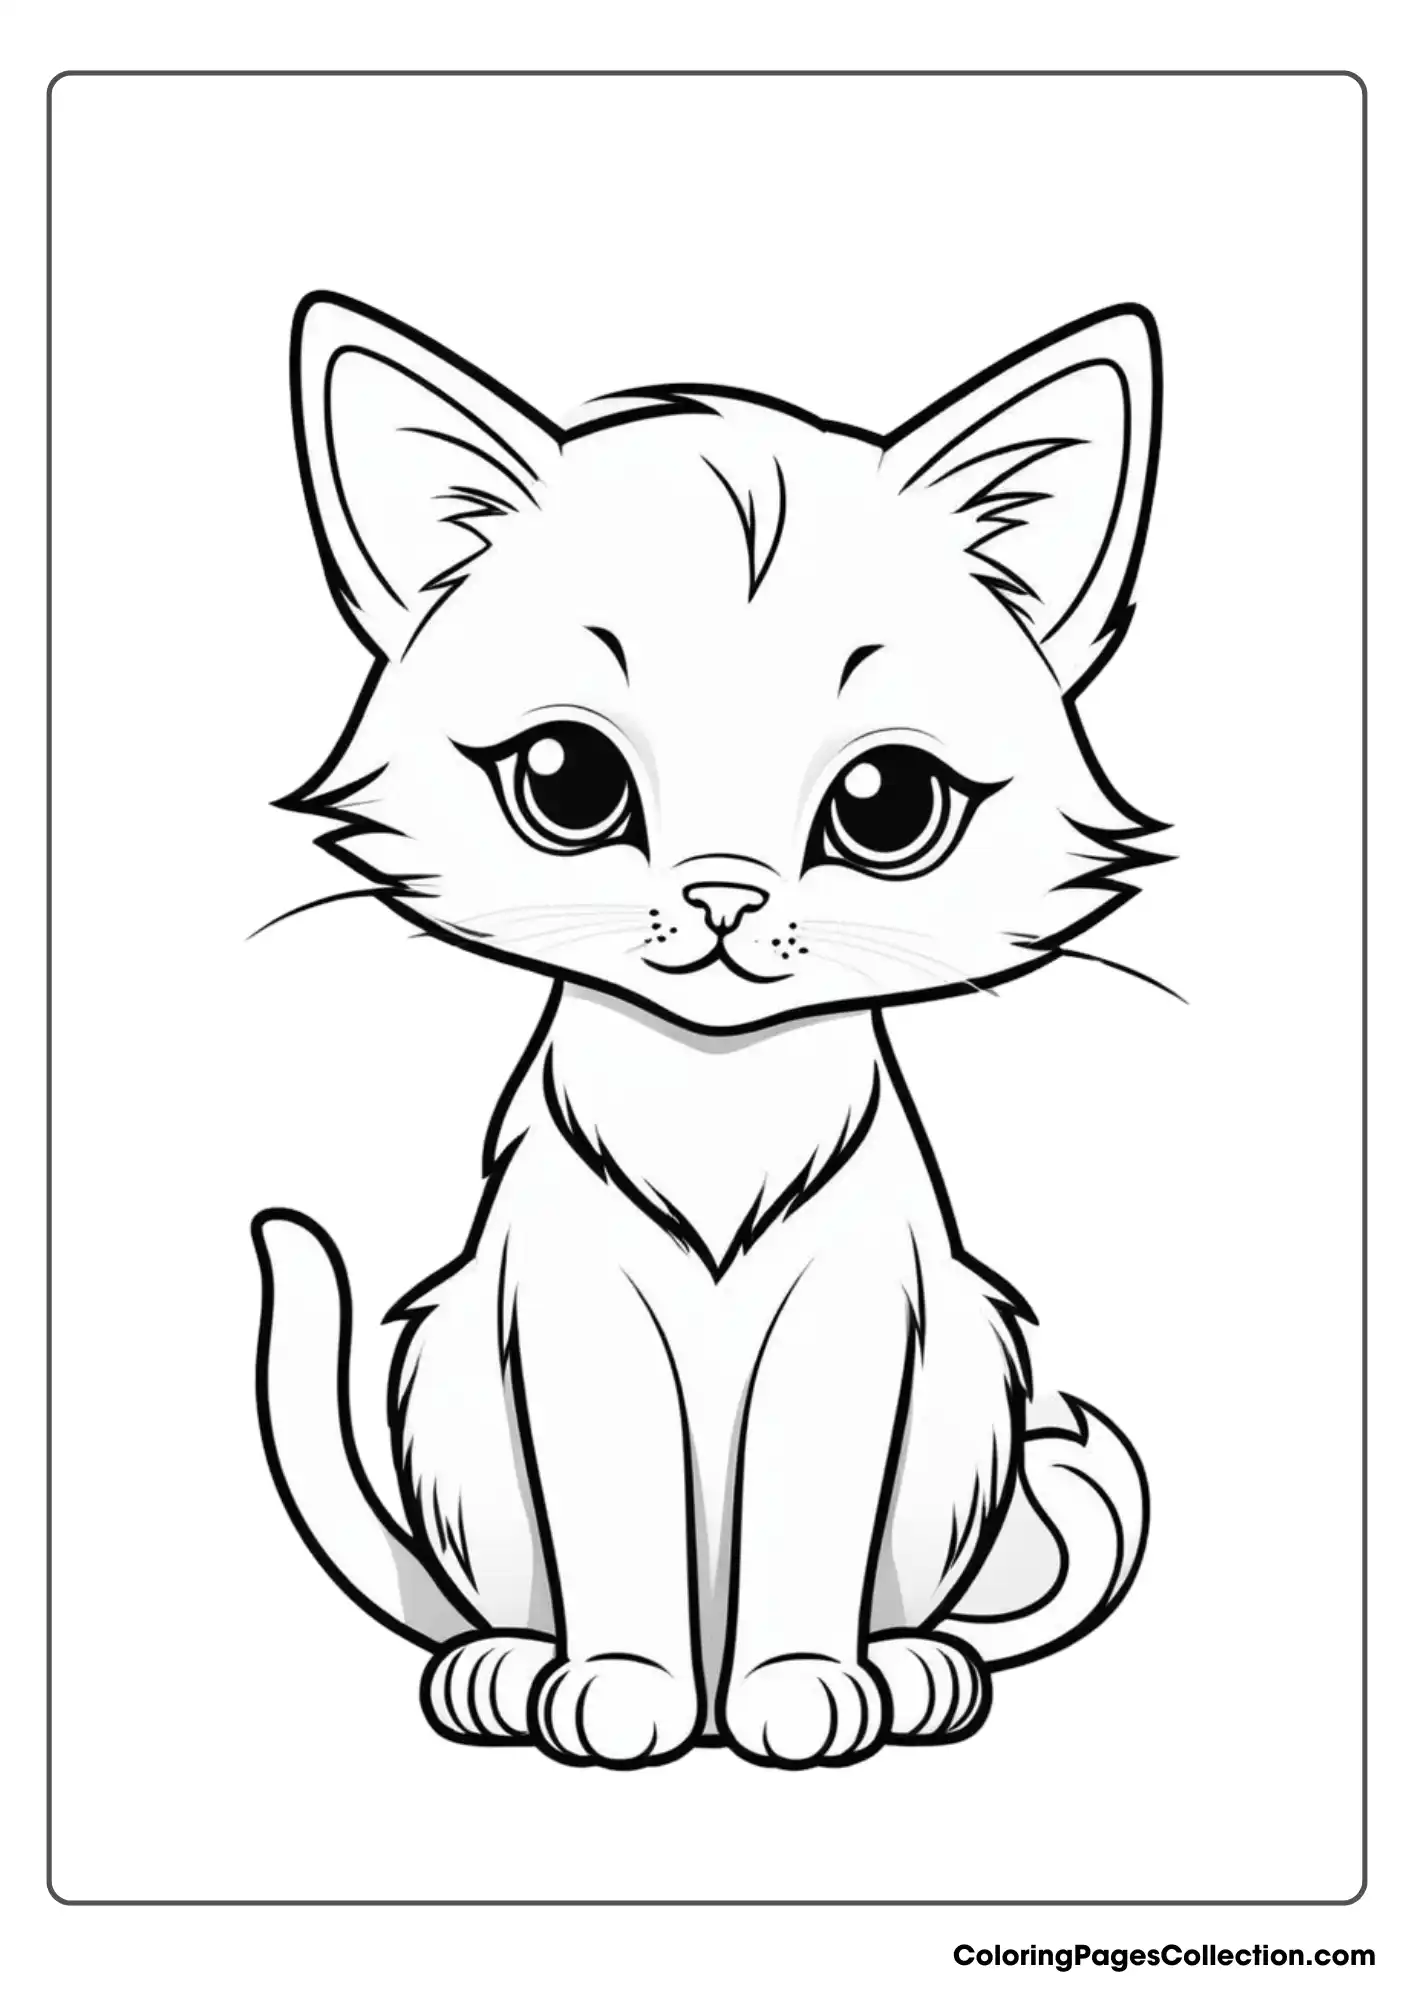 Coloring pages for teens, Cute Kitten 